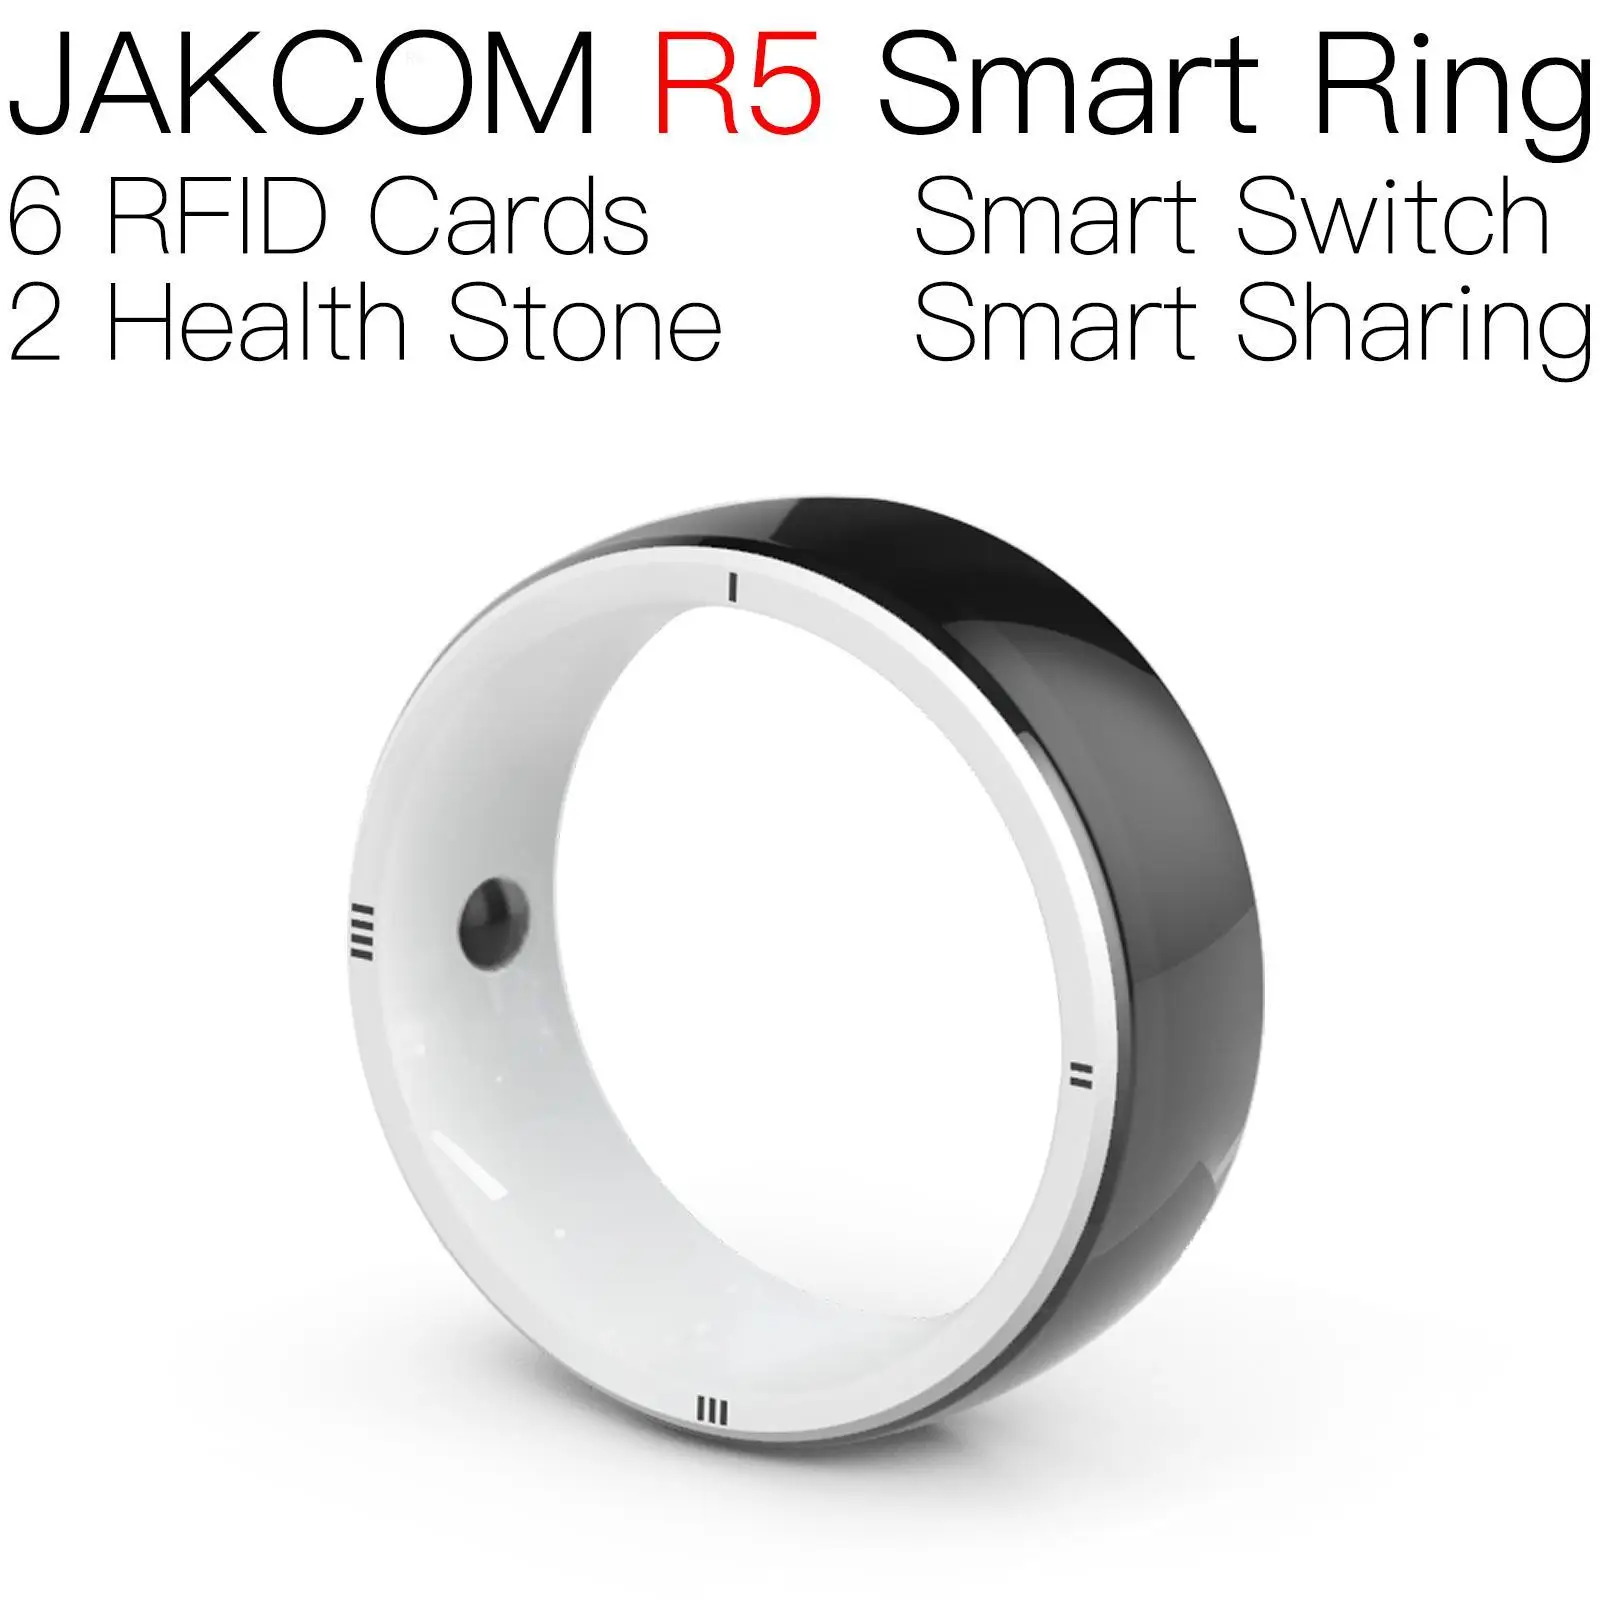 

JAKCOM R5 Smart Ring For men women rfid tag enclosure you tube premium code dual frequency hf uhf nfc classic 1k s50 and h3